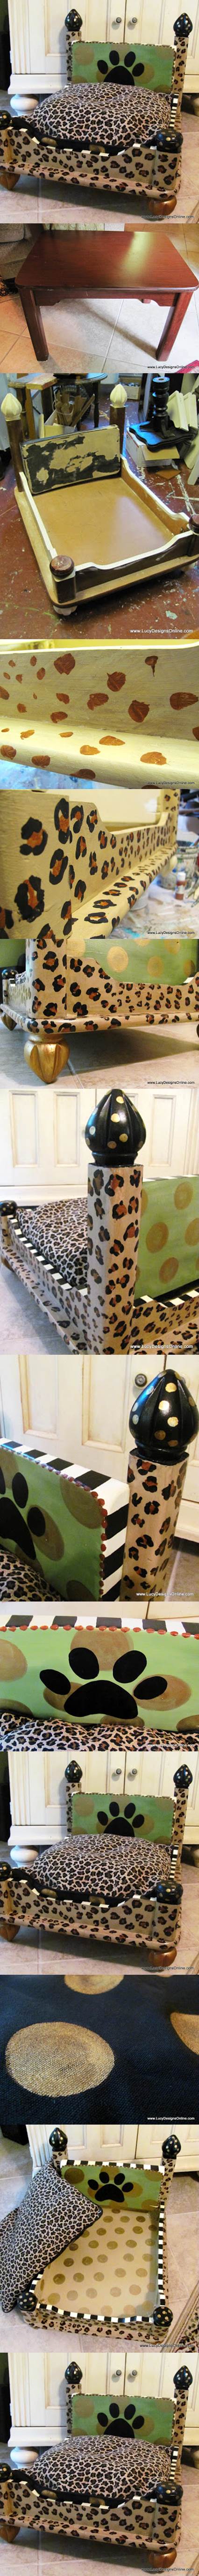 DIY Leopard Print Dog Bed from an End Table 2